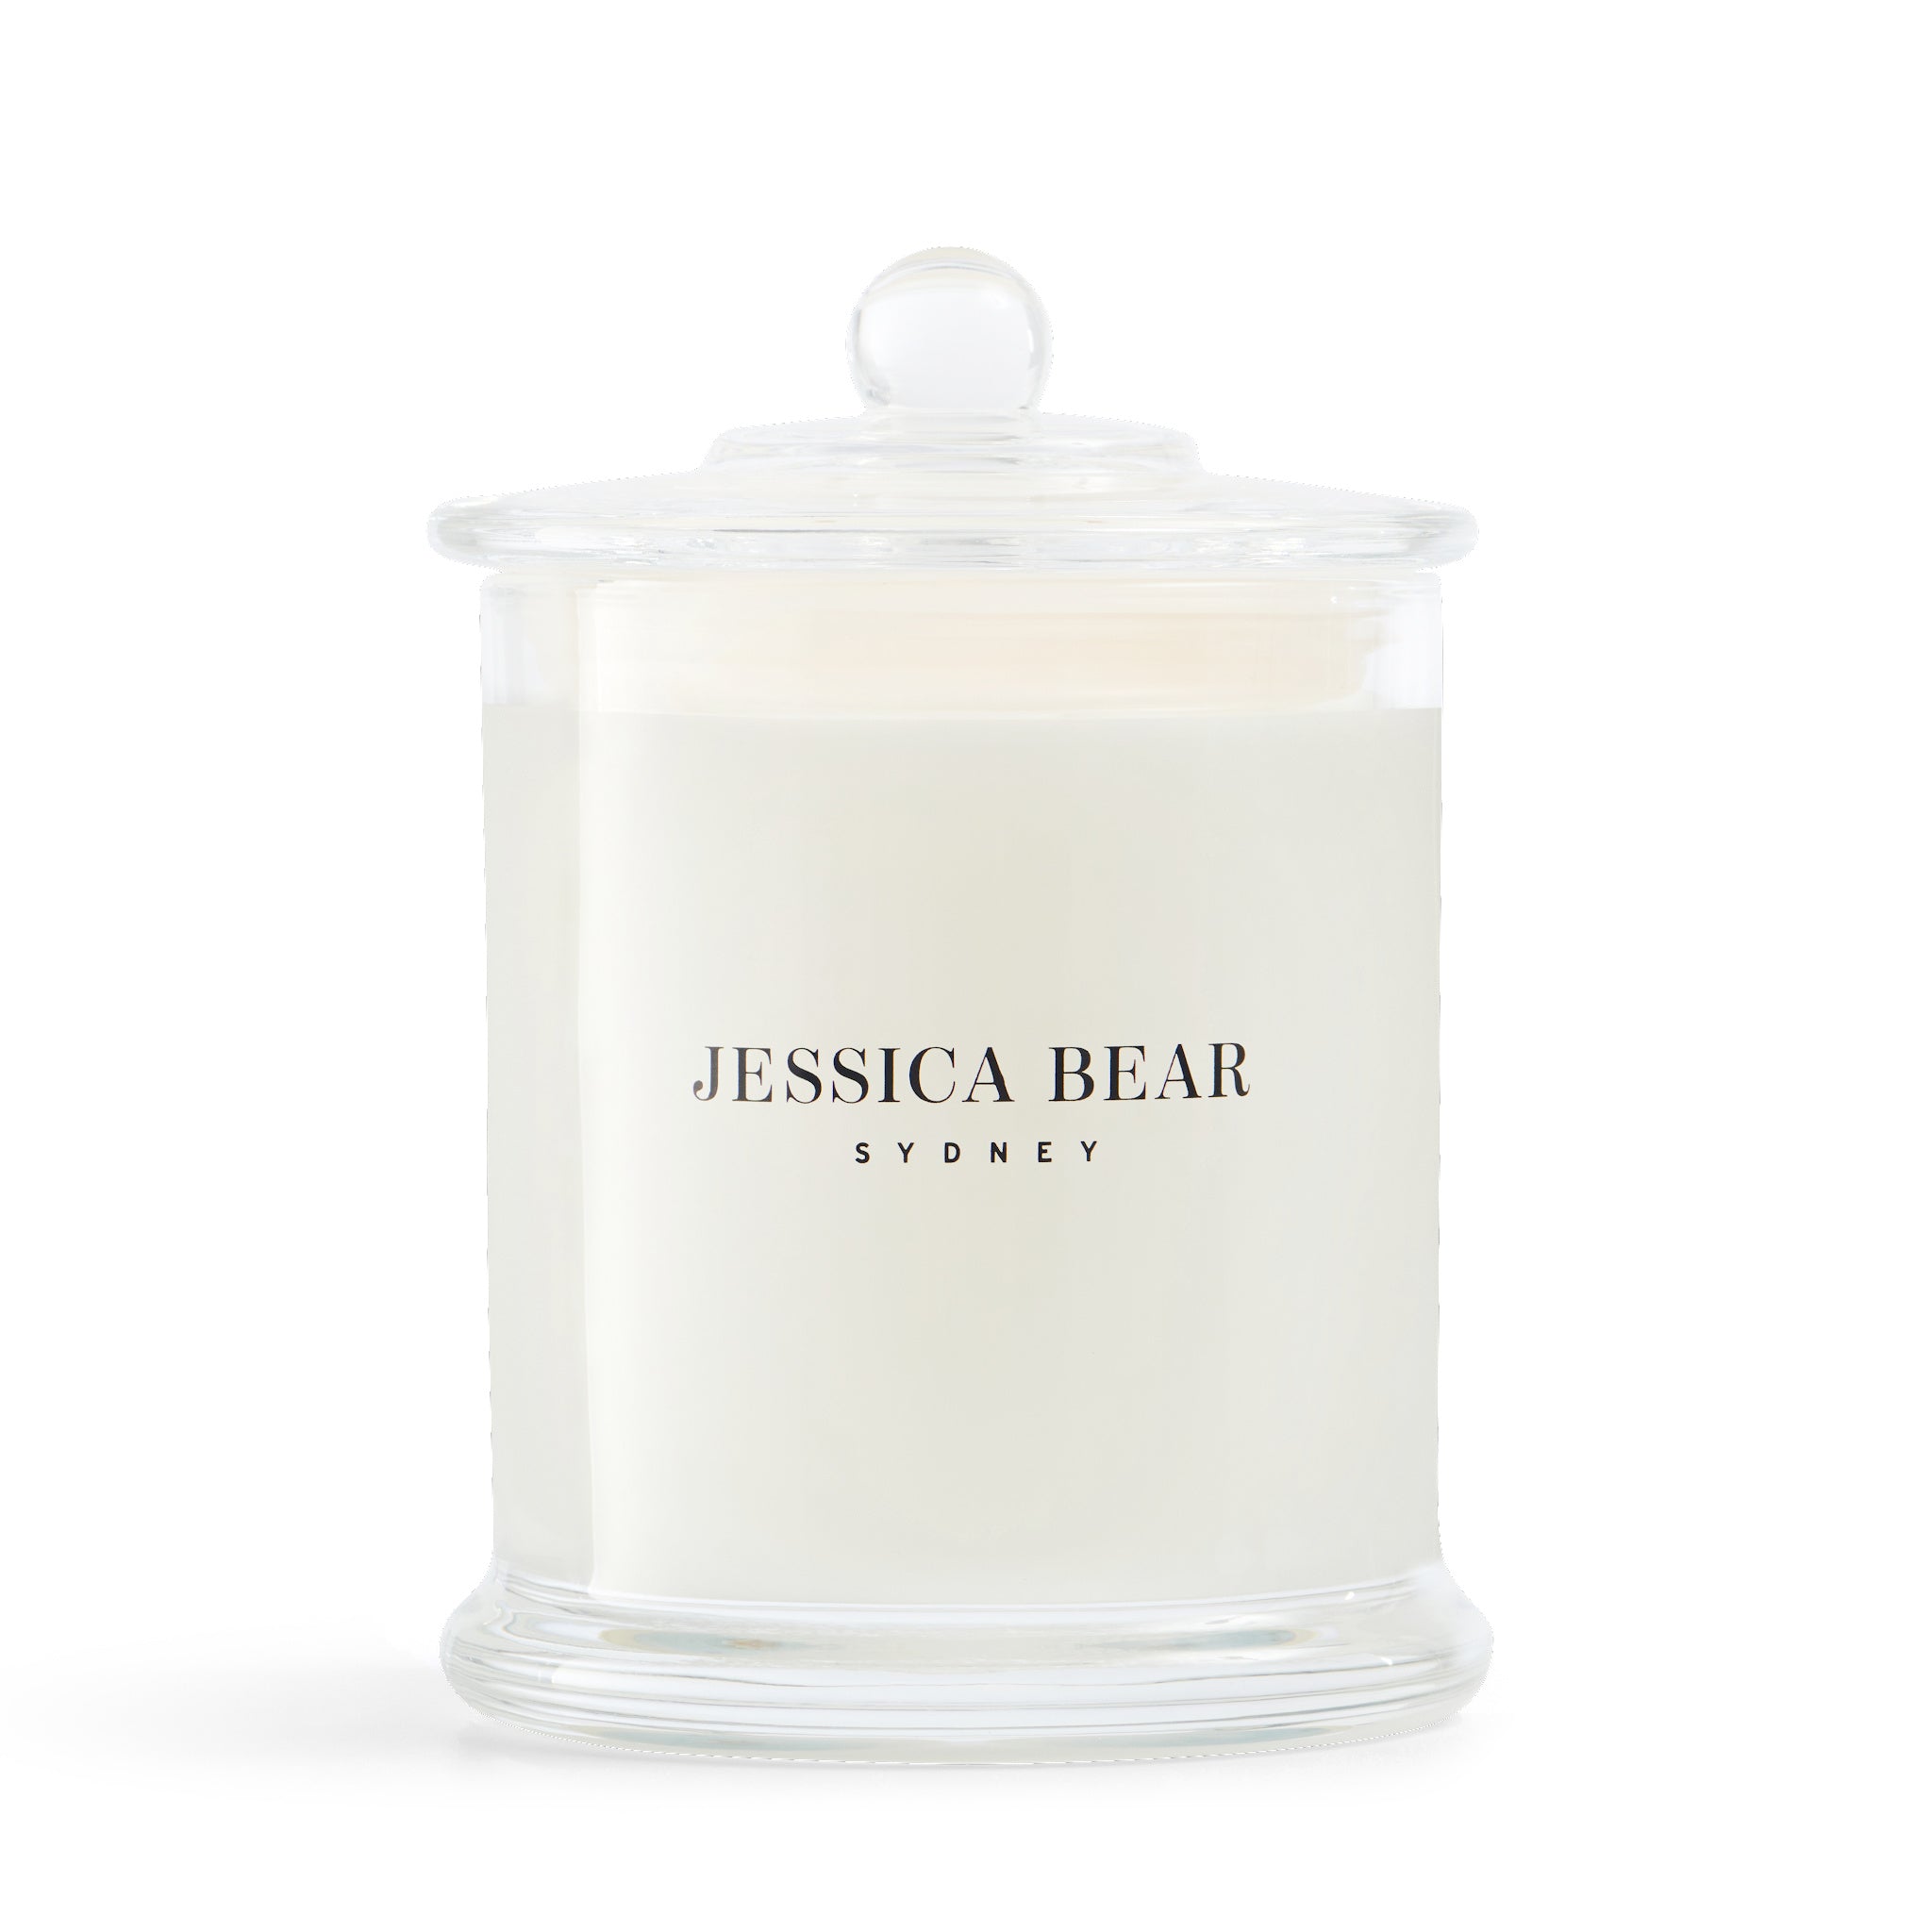 Gabrielle - 380g Scented Candle